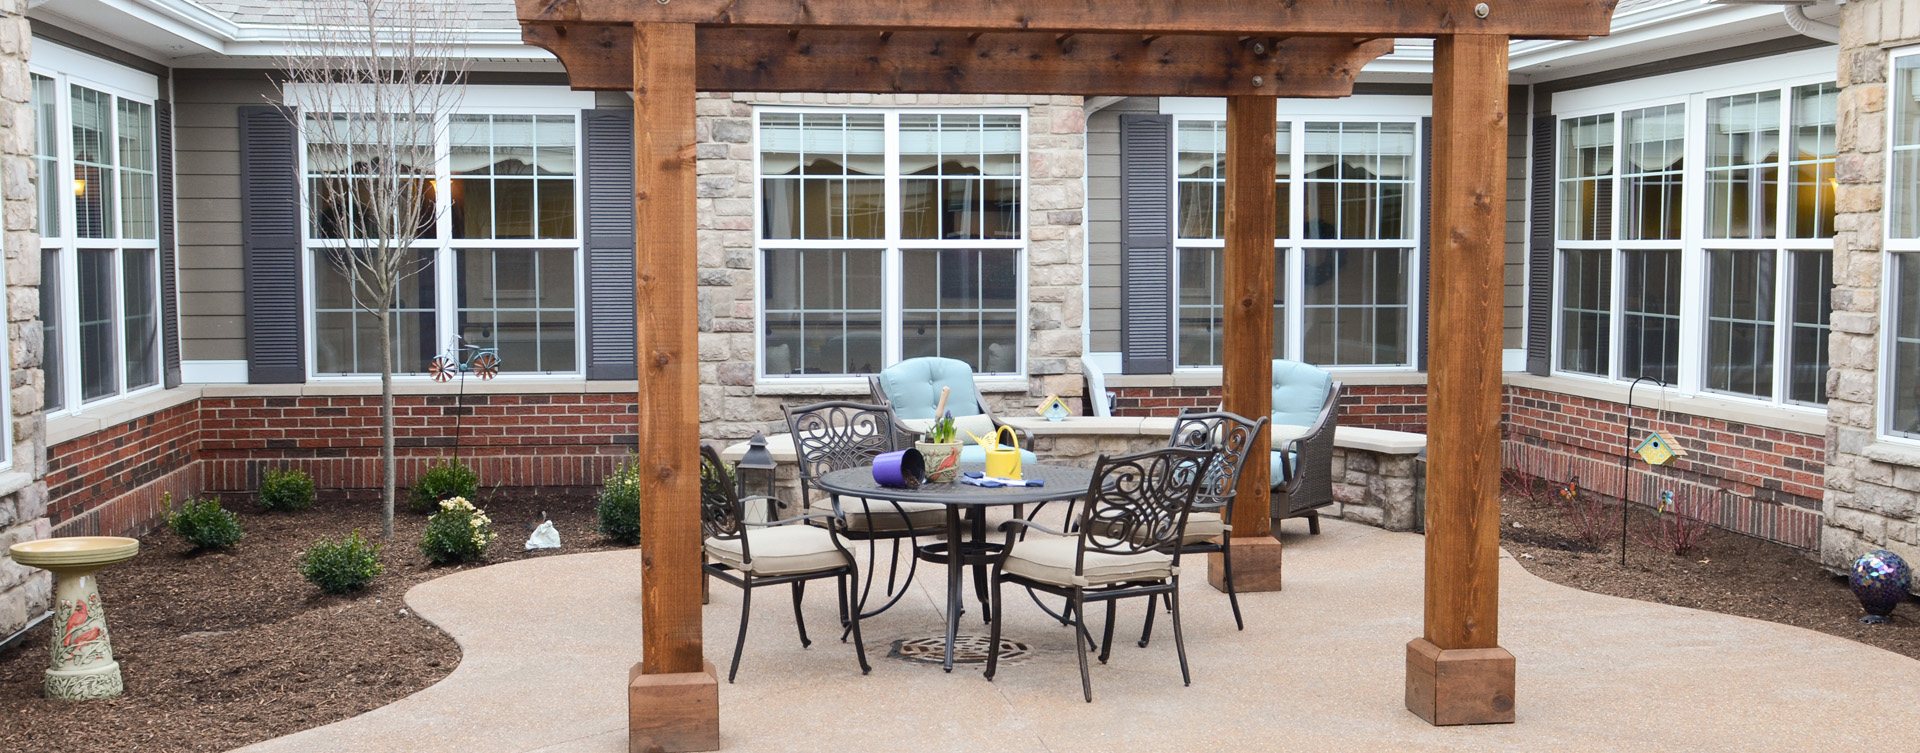 Residents with dementia can enjoy the outdoors by stepping into our secure courtyard at Bickford of Gurnee